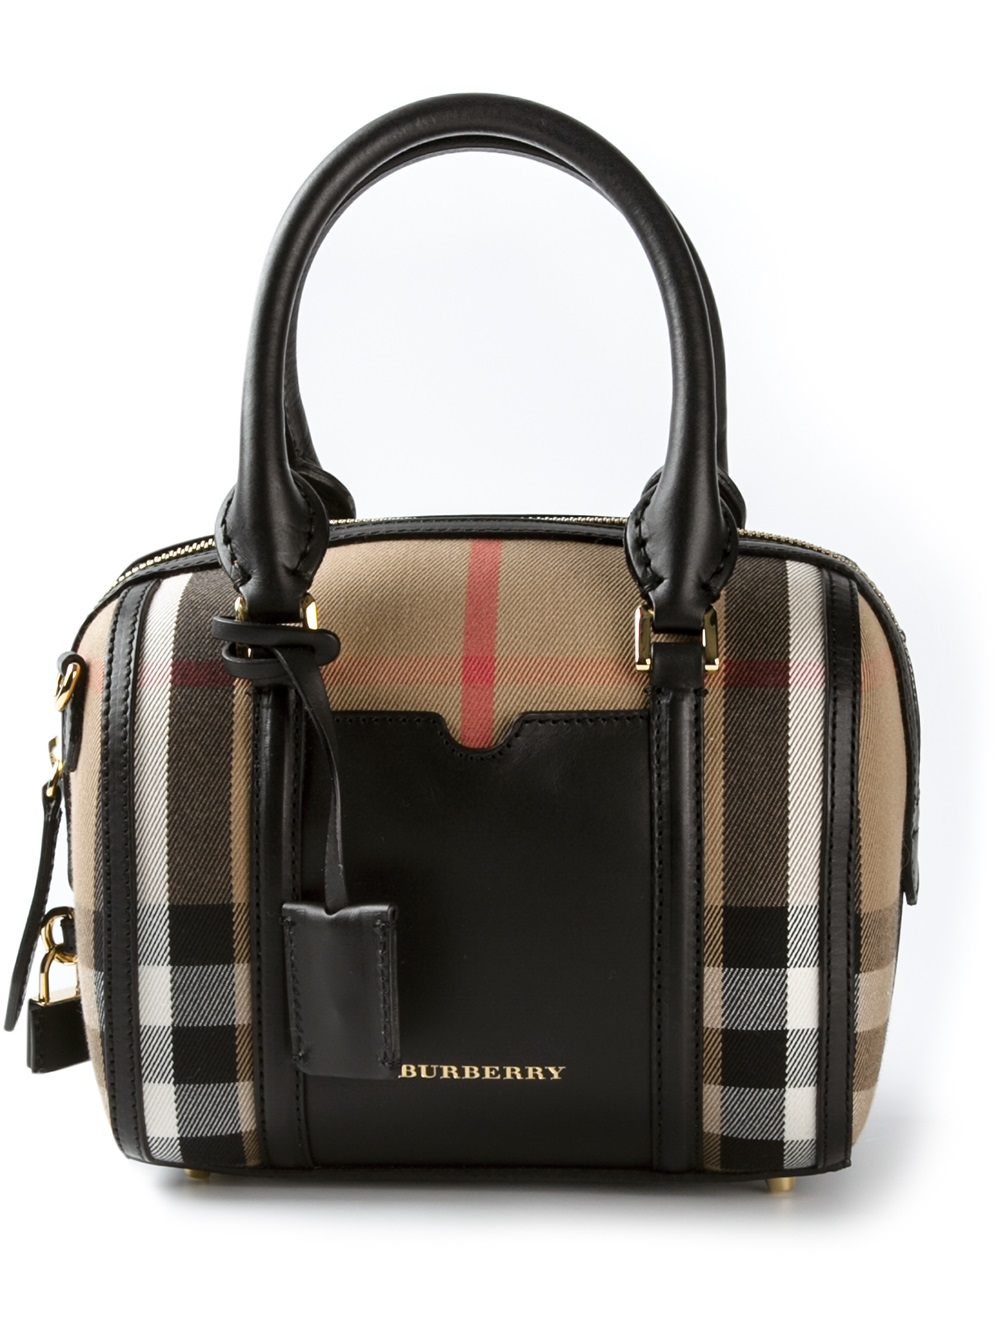 Burberry Sartorial House Check Mini Bowling Bag in Brown - Lyst